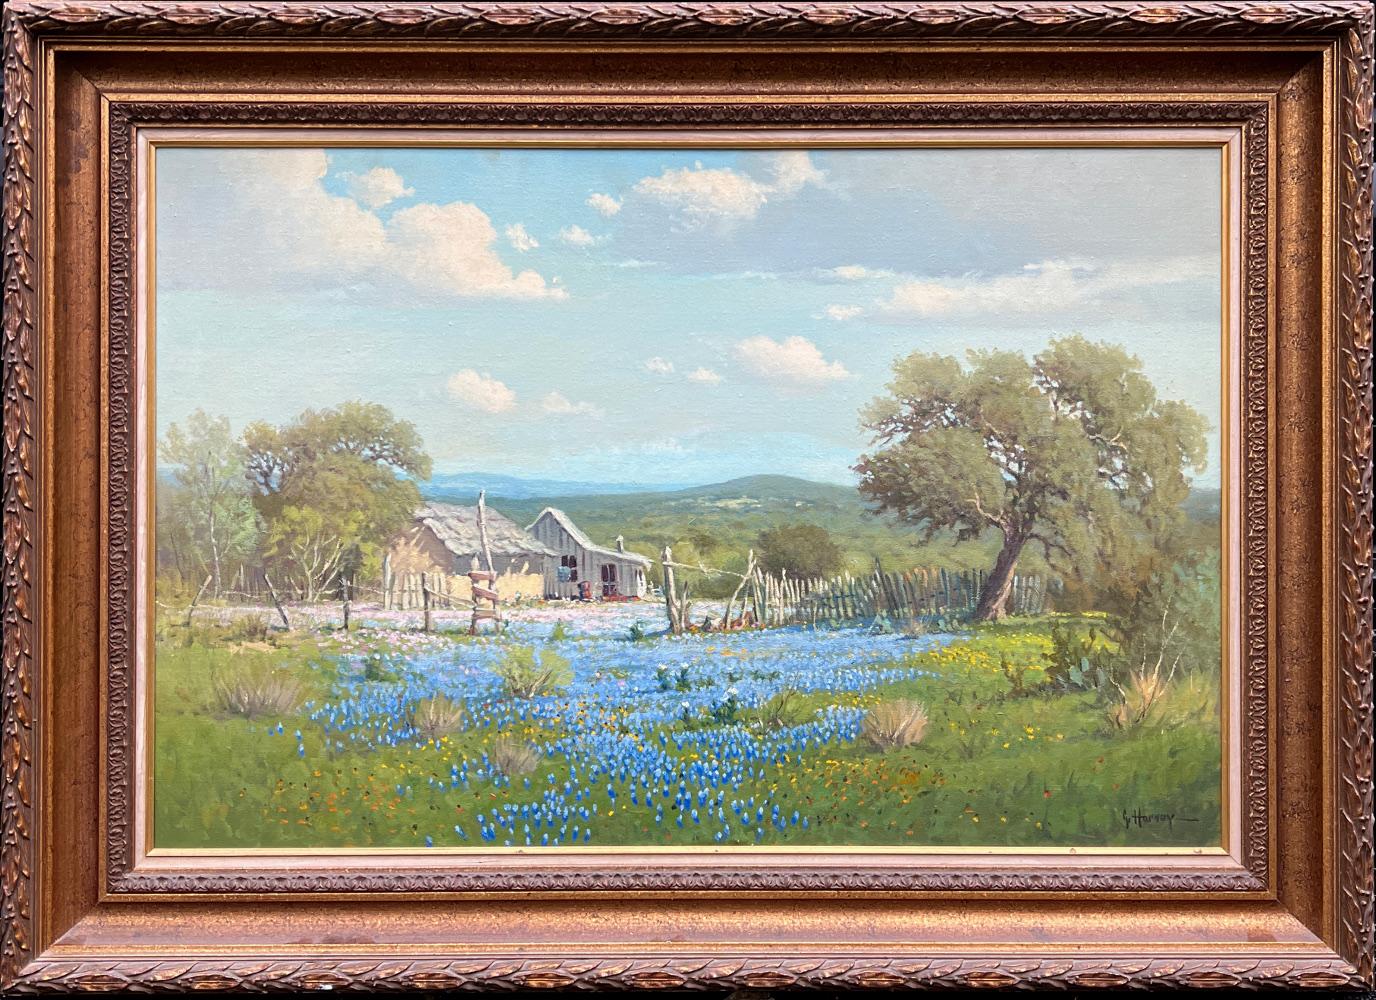 G. Harvey Landscape Painting - "OLD HOMESTEAD" TEXAS HILL COUNTRY BLUEBONNETS, OLD GERMAN SHACK 32x44 FRAMED